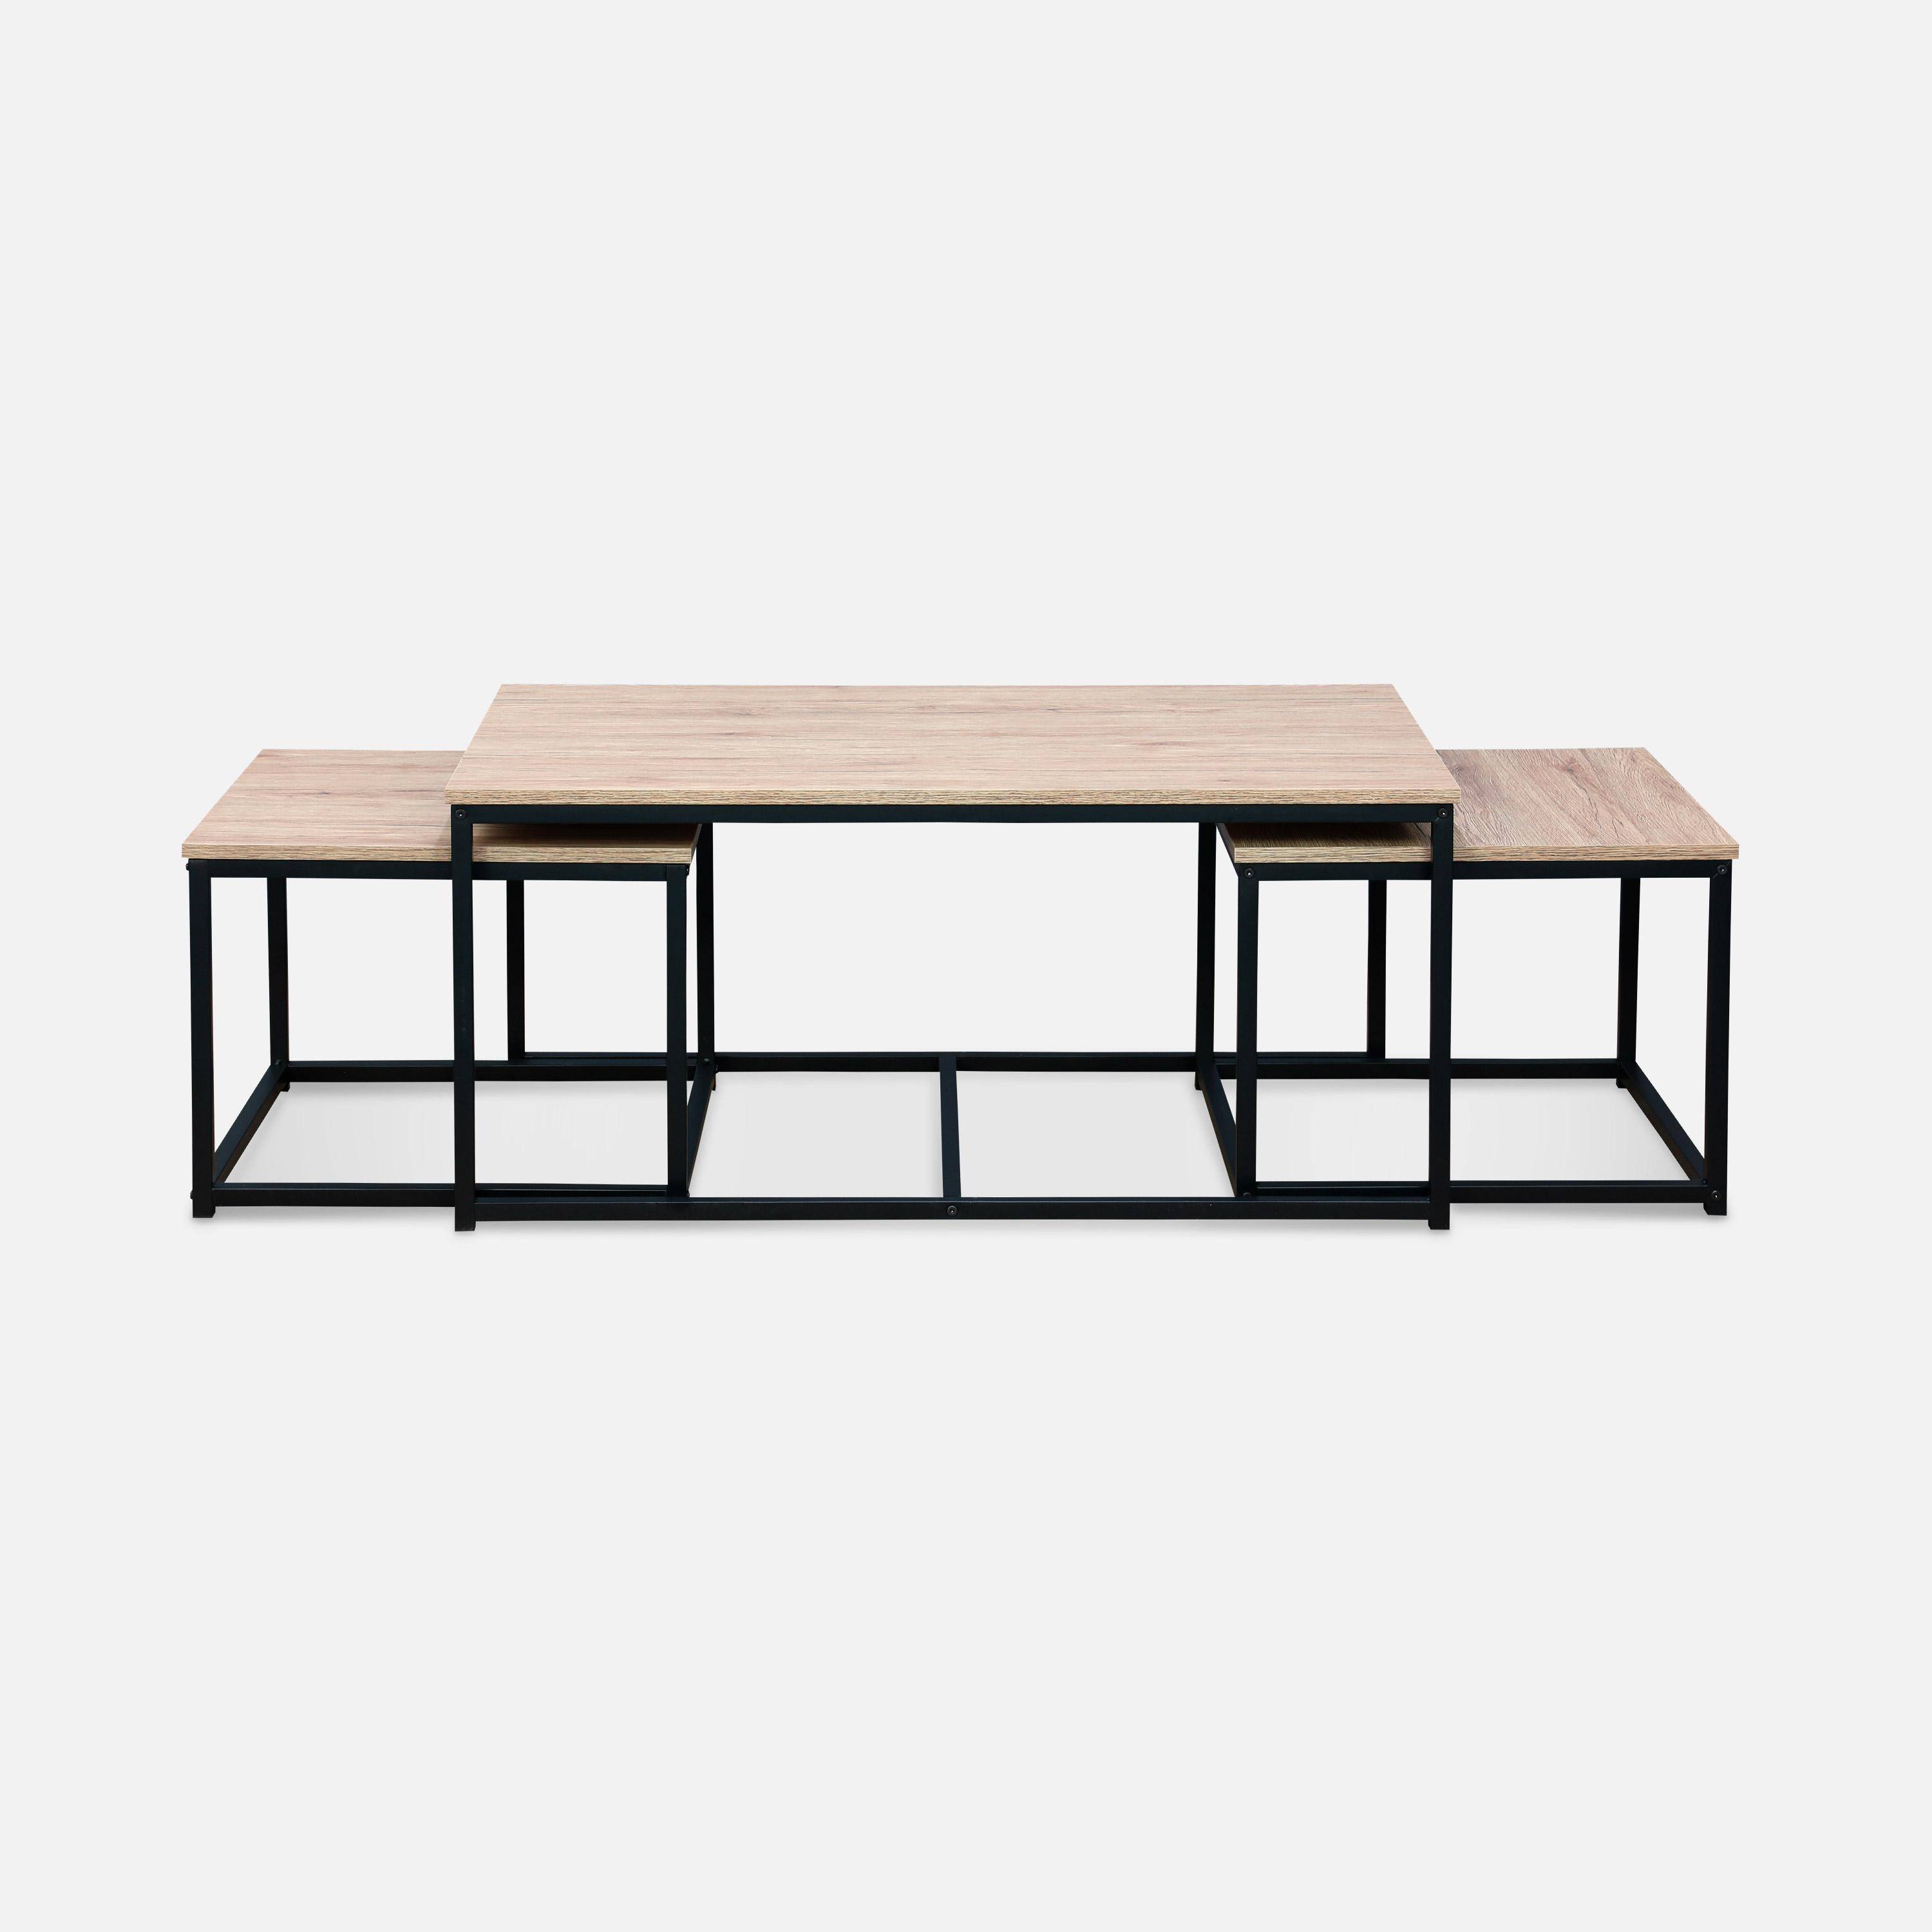 Set of 3 metal and wood-effect nesting tables, large table 100x60x45cm, 2x small tables 50x50x38cm - Loft - Black Photo4